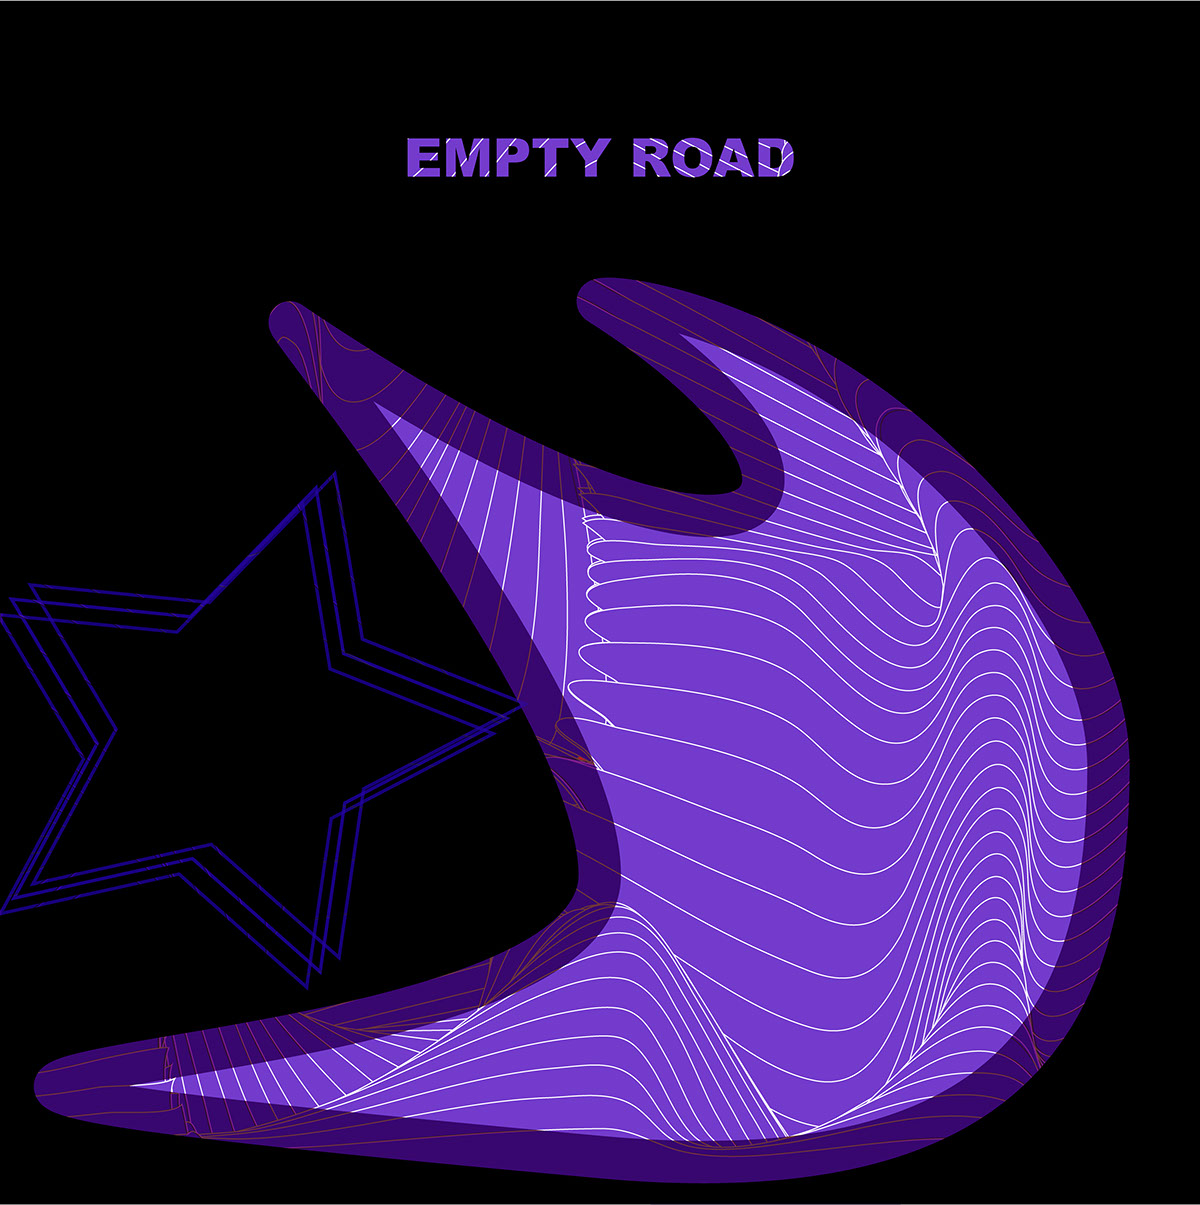 ENDLESS ROAD rendition image